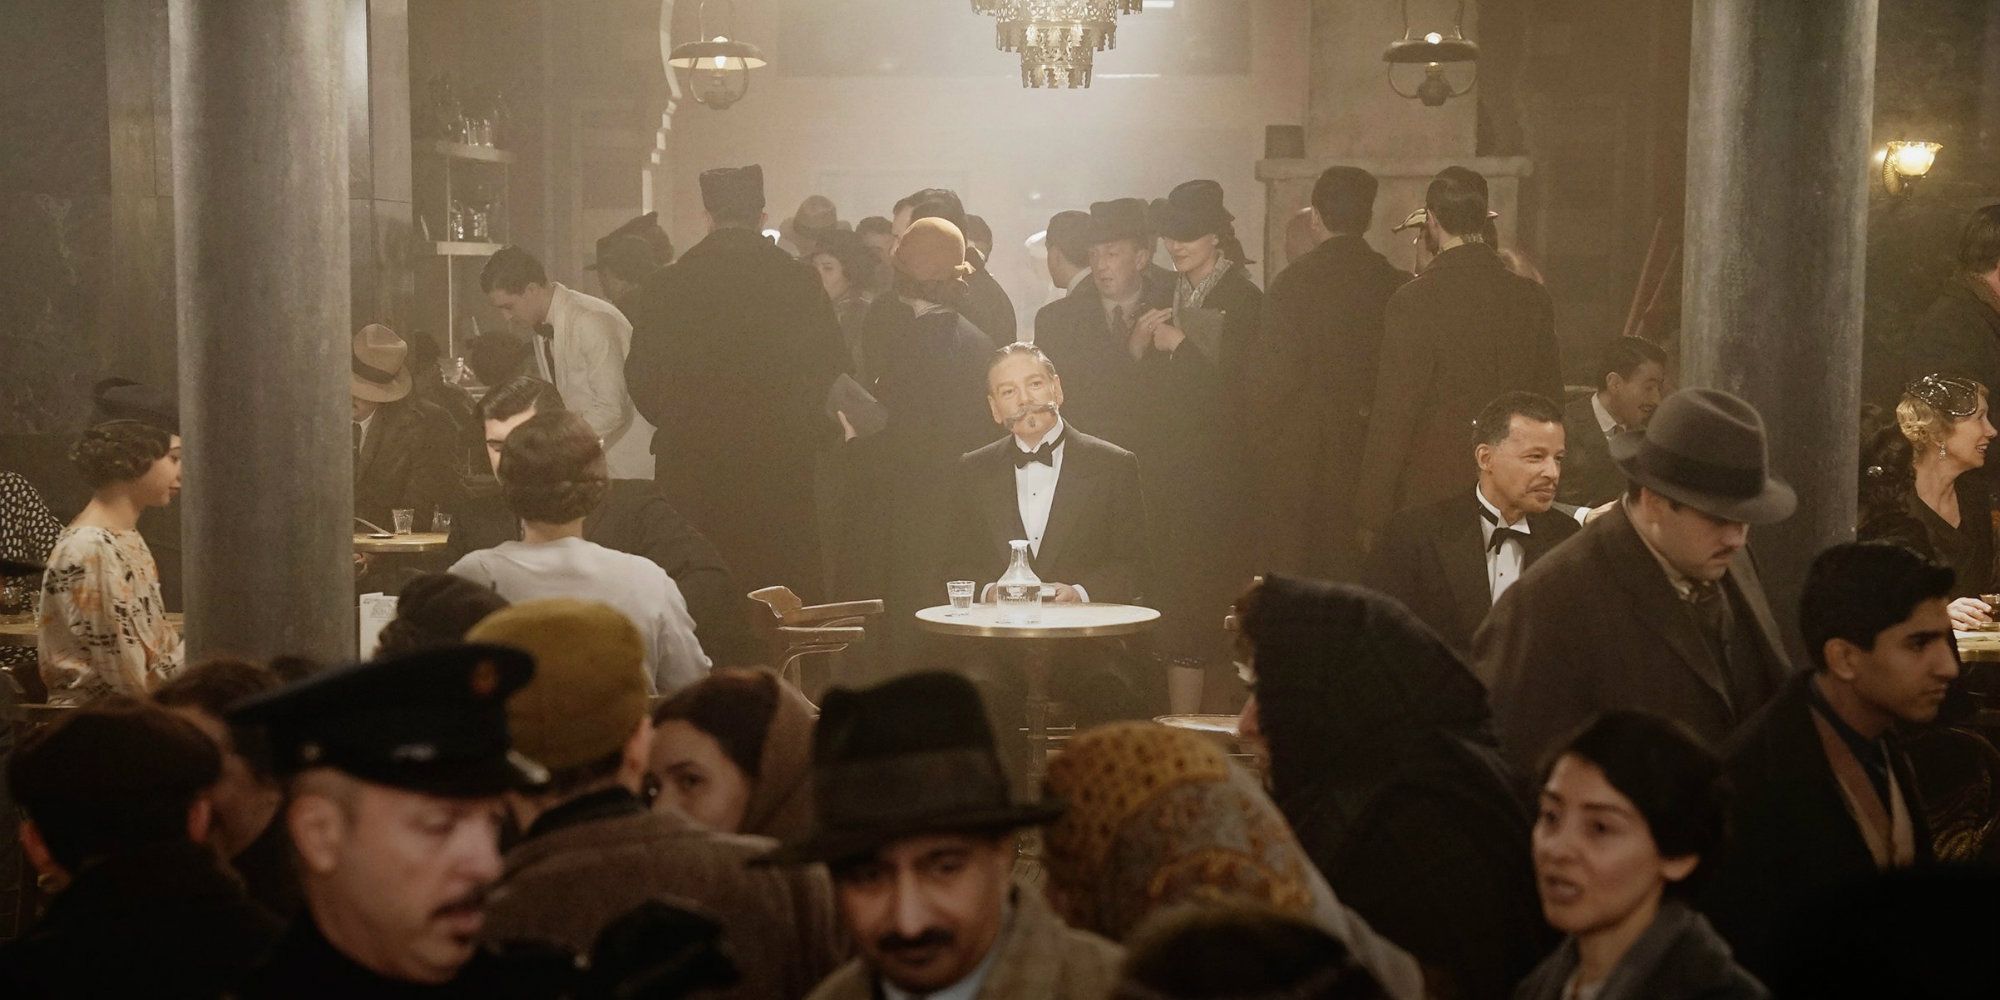 Murder on the Orient Express Sequel Death on the Nile Moves to 2020